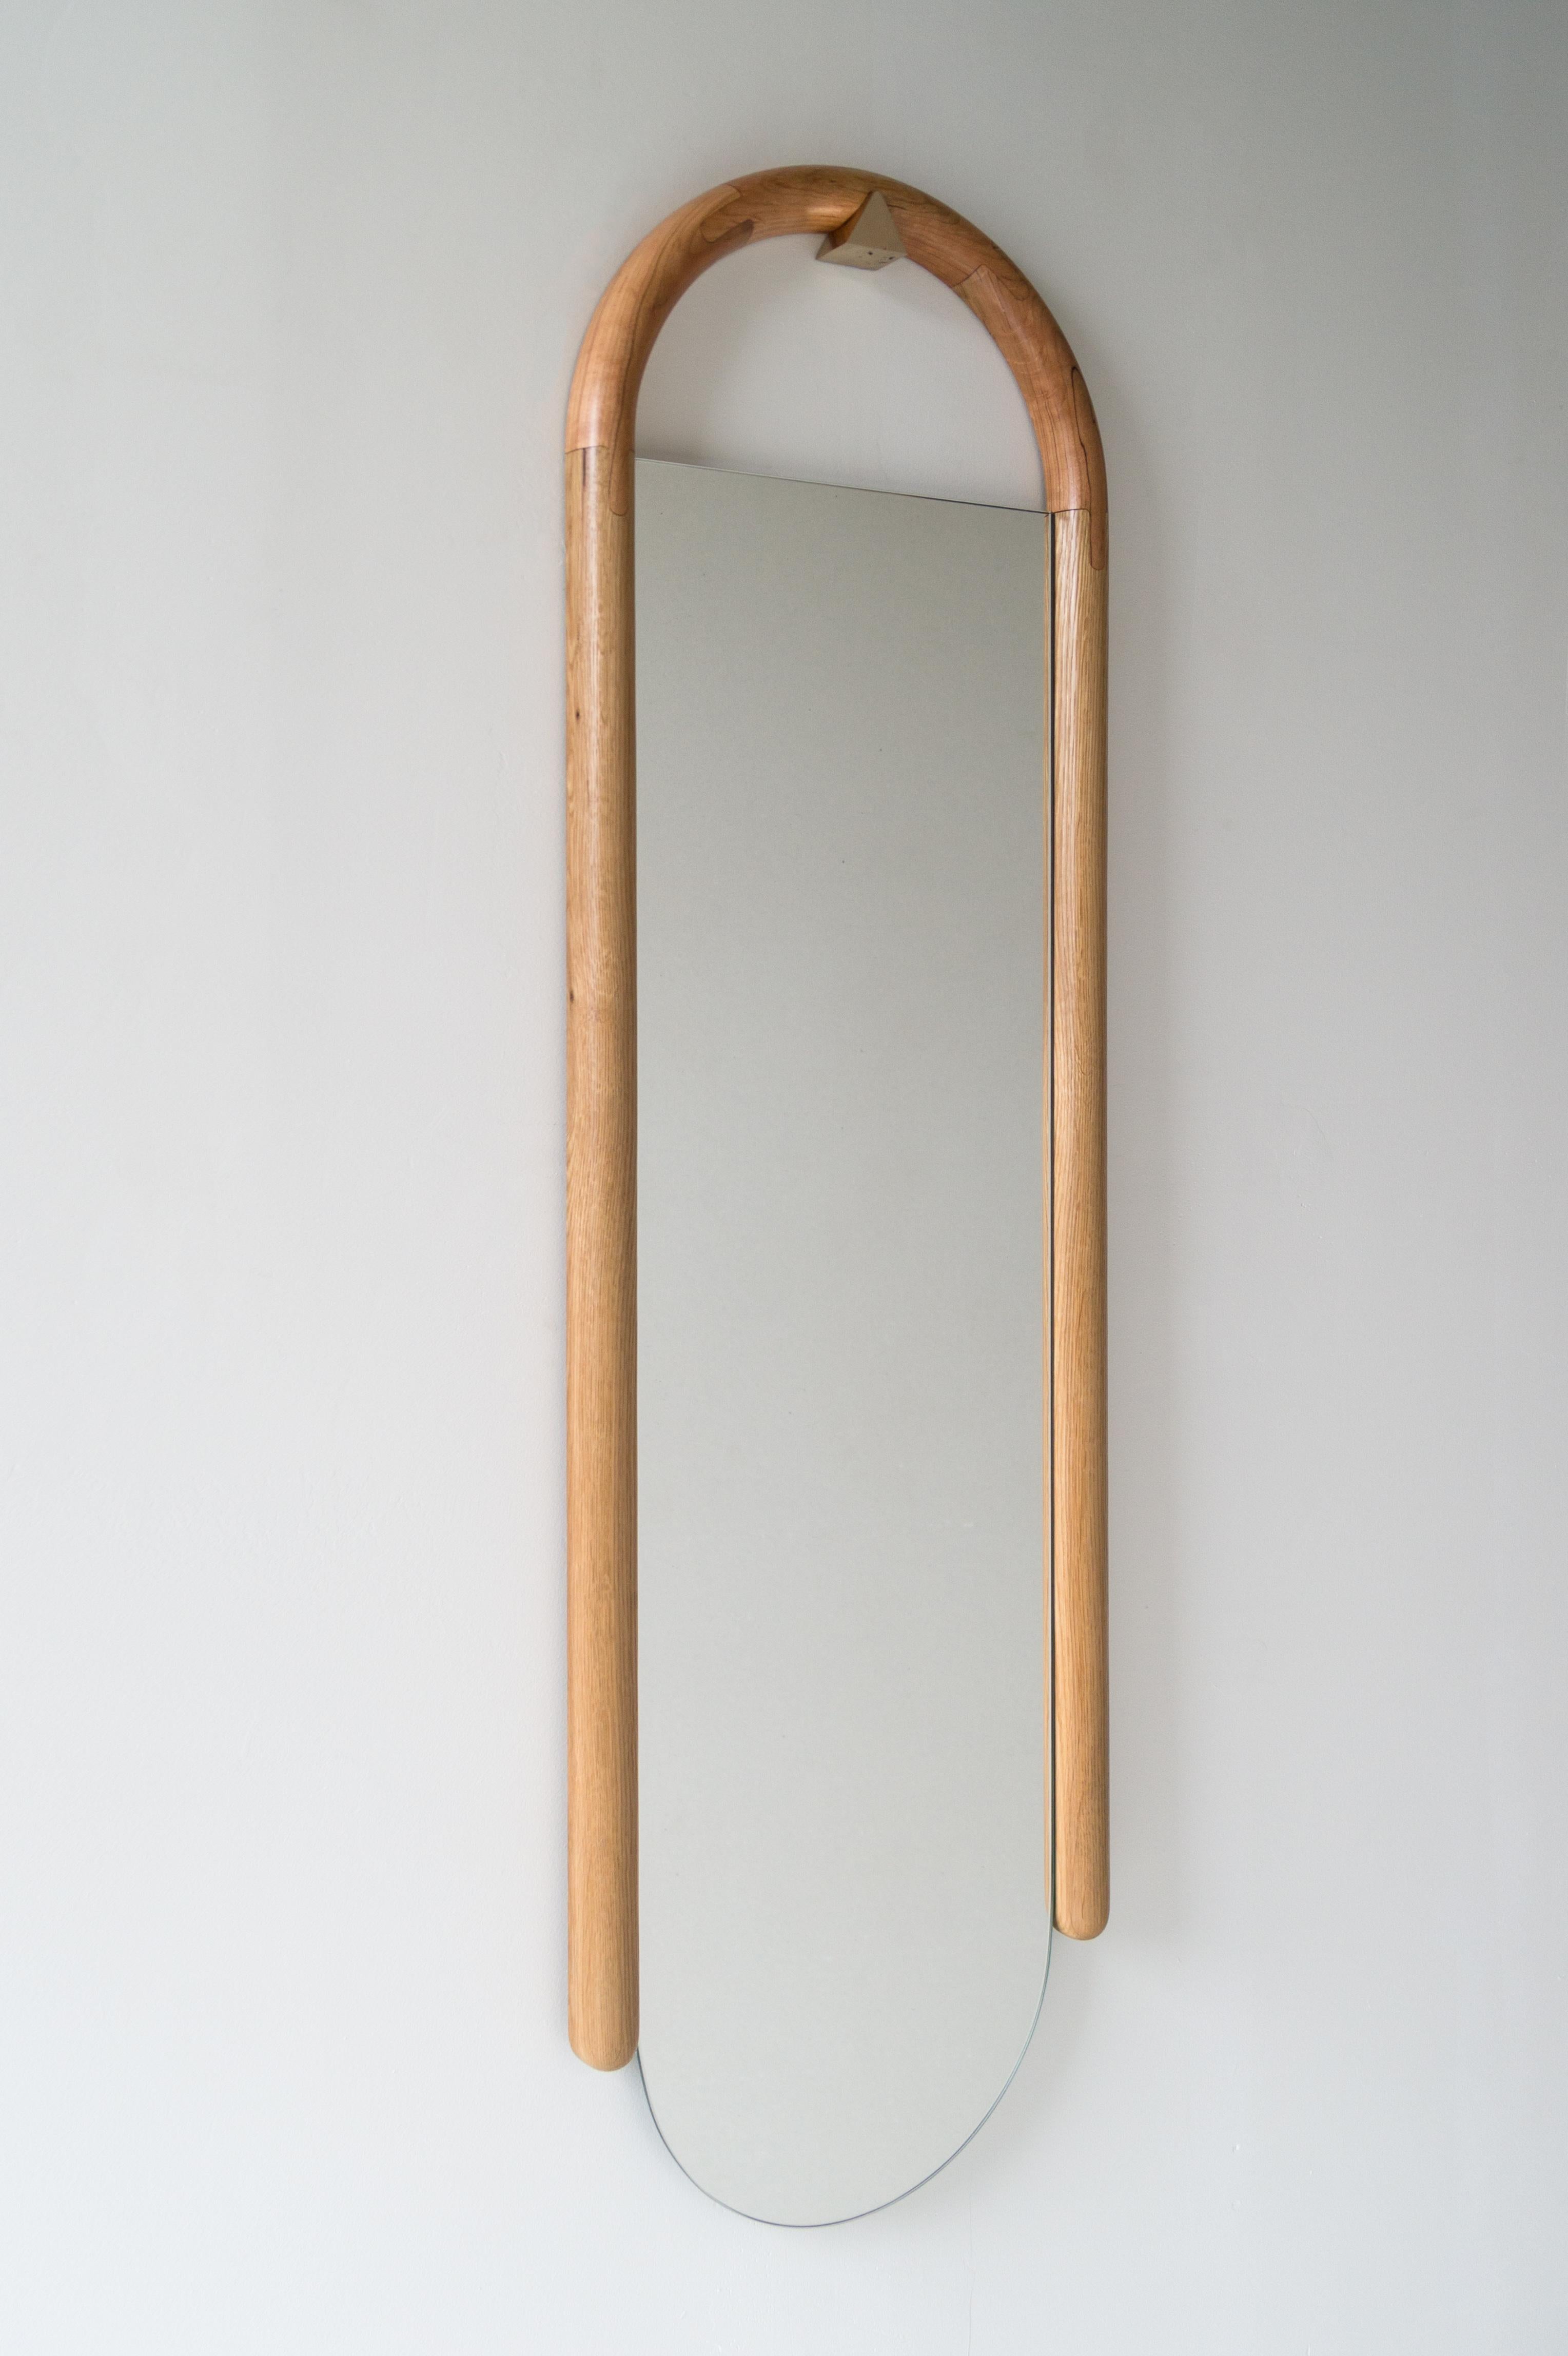 Halo Mirror Wall Mounted Birnam Wood Studio in Figured Walnut and Curly Maple In New Condition For Sale In Ridgewood, NY